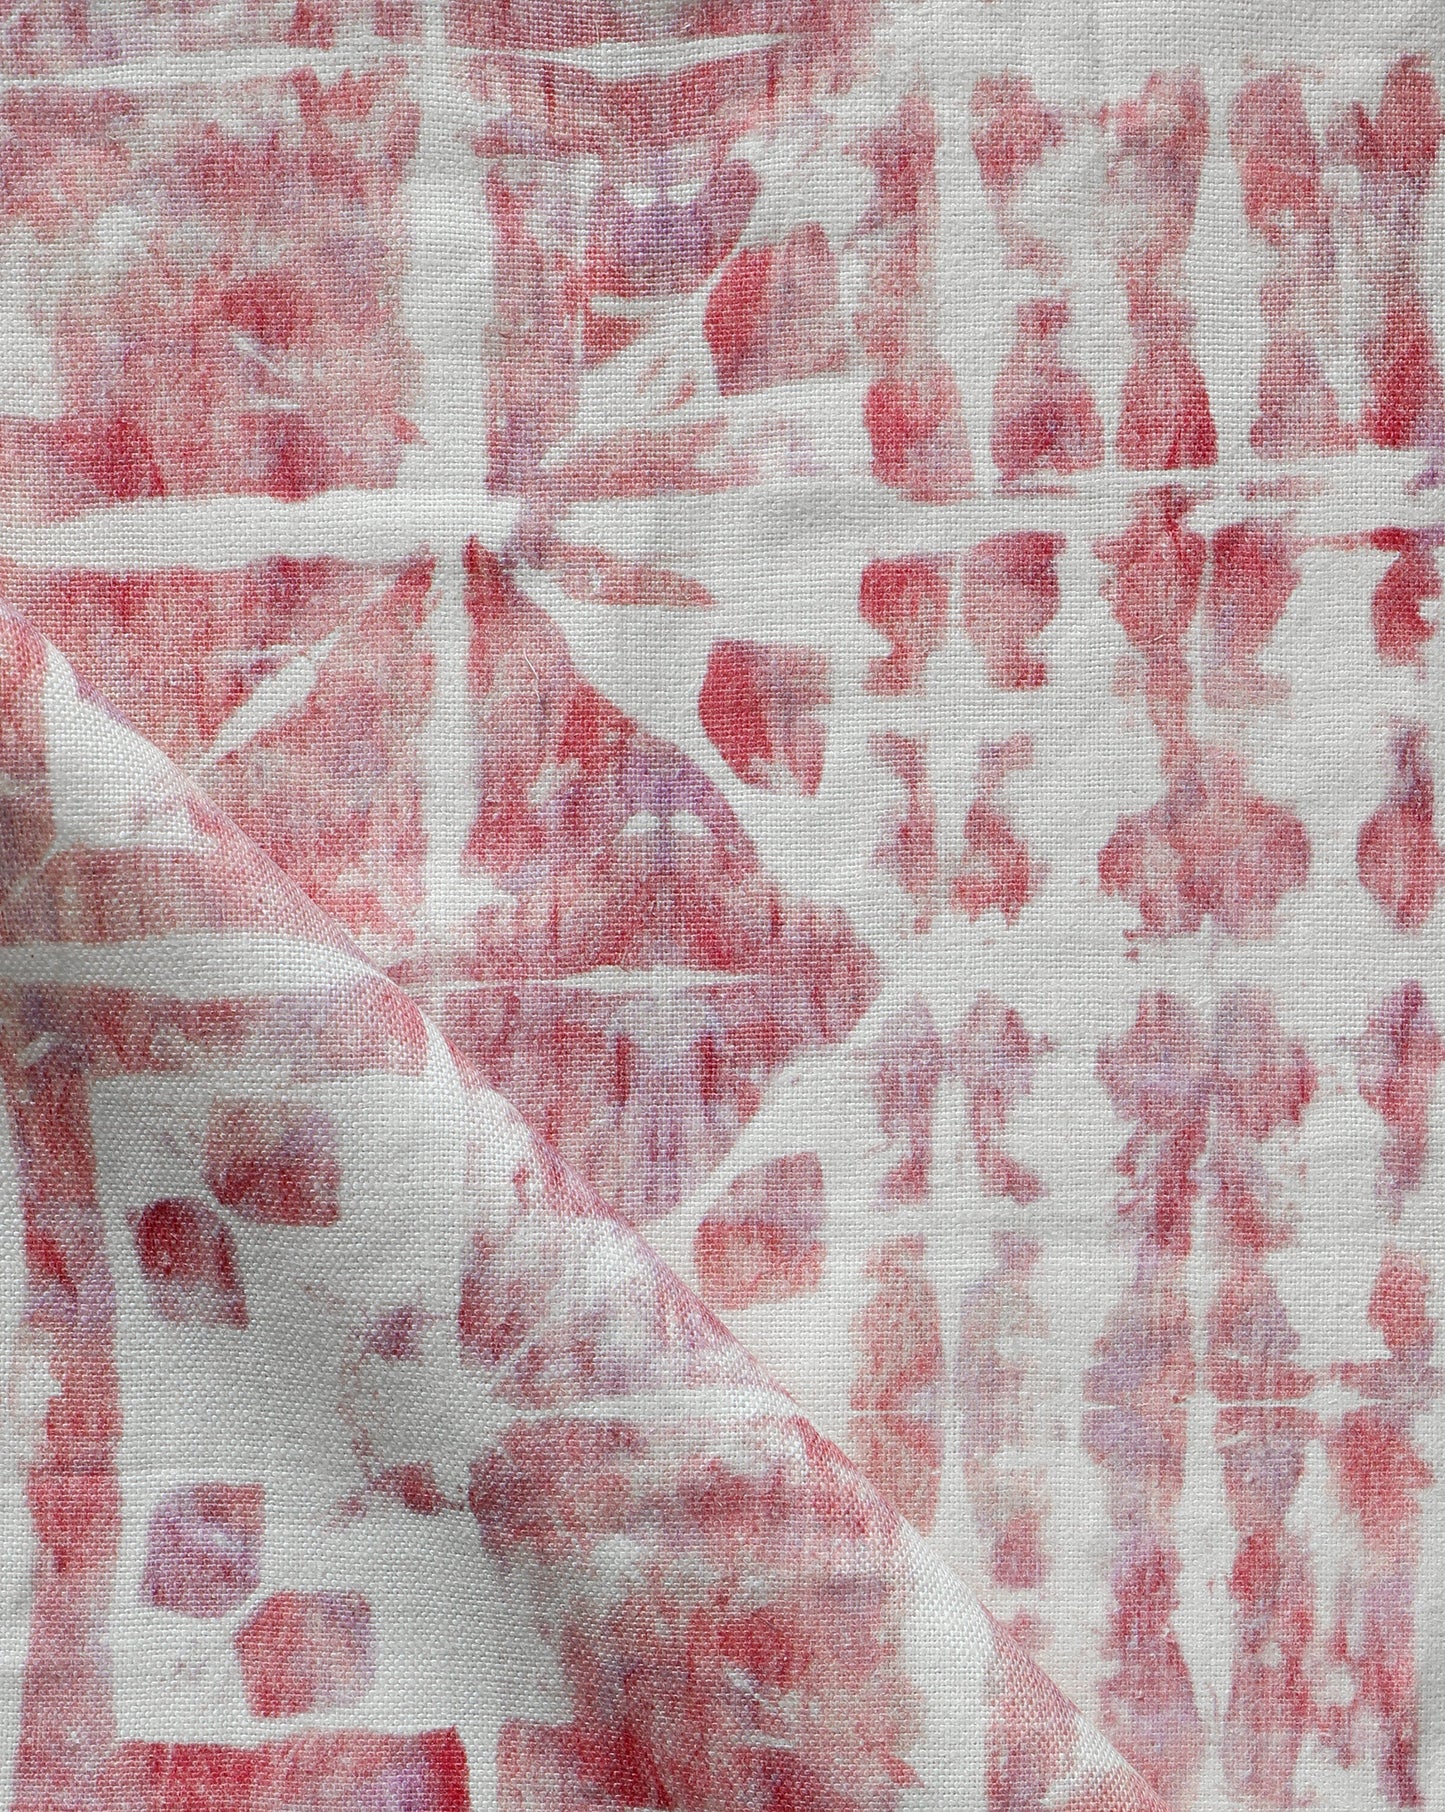 A red and white Banda Fabric with a tie-dye pattern on it.